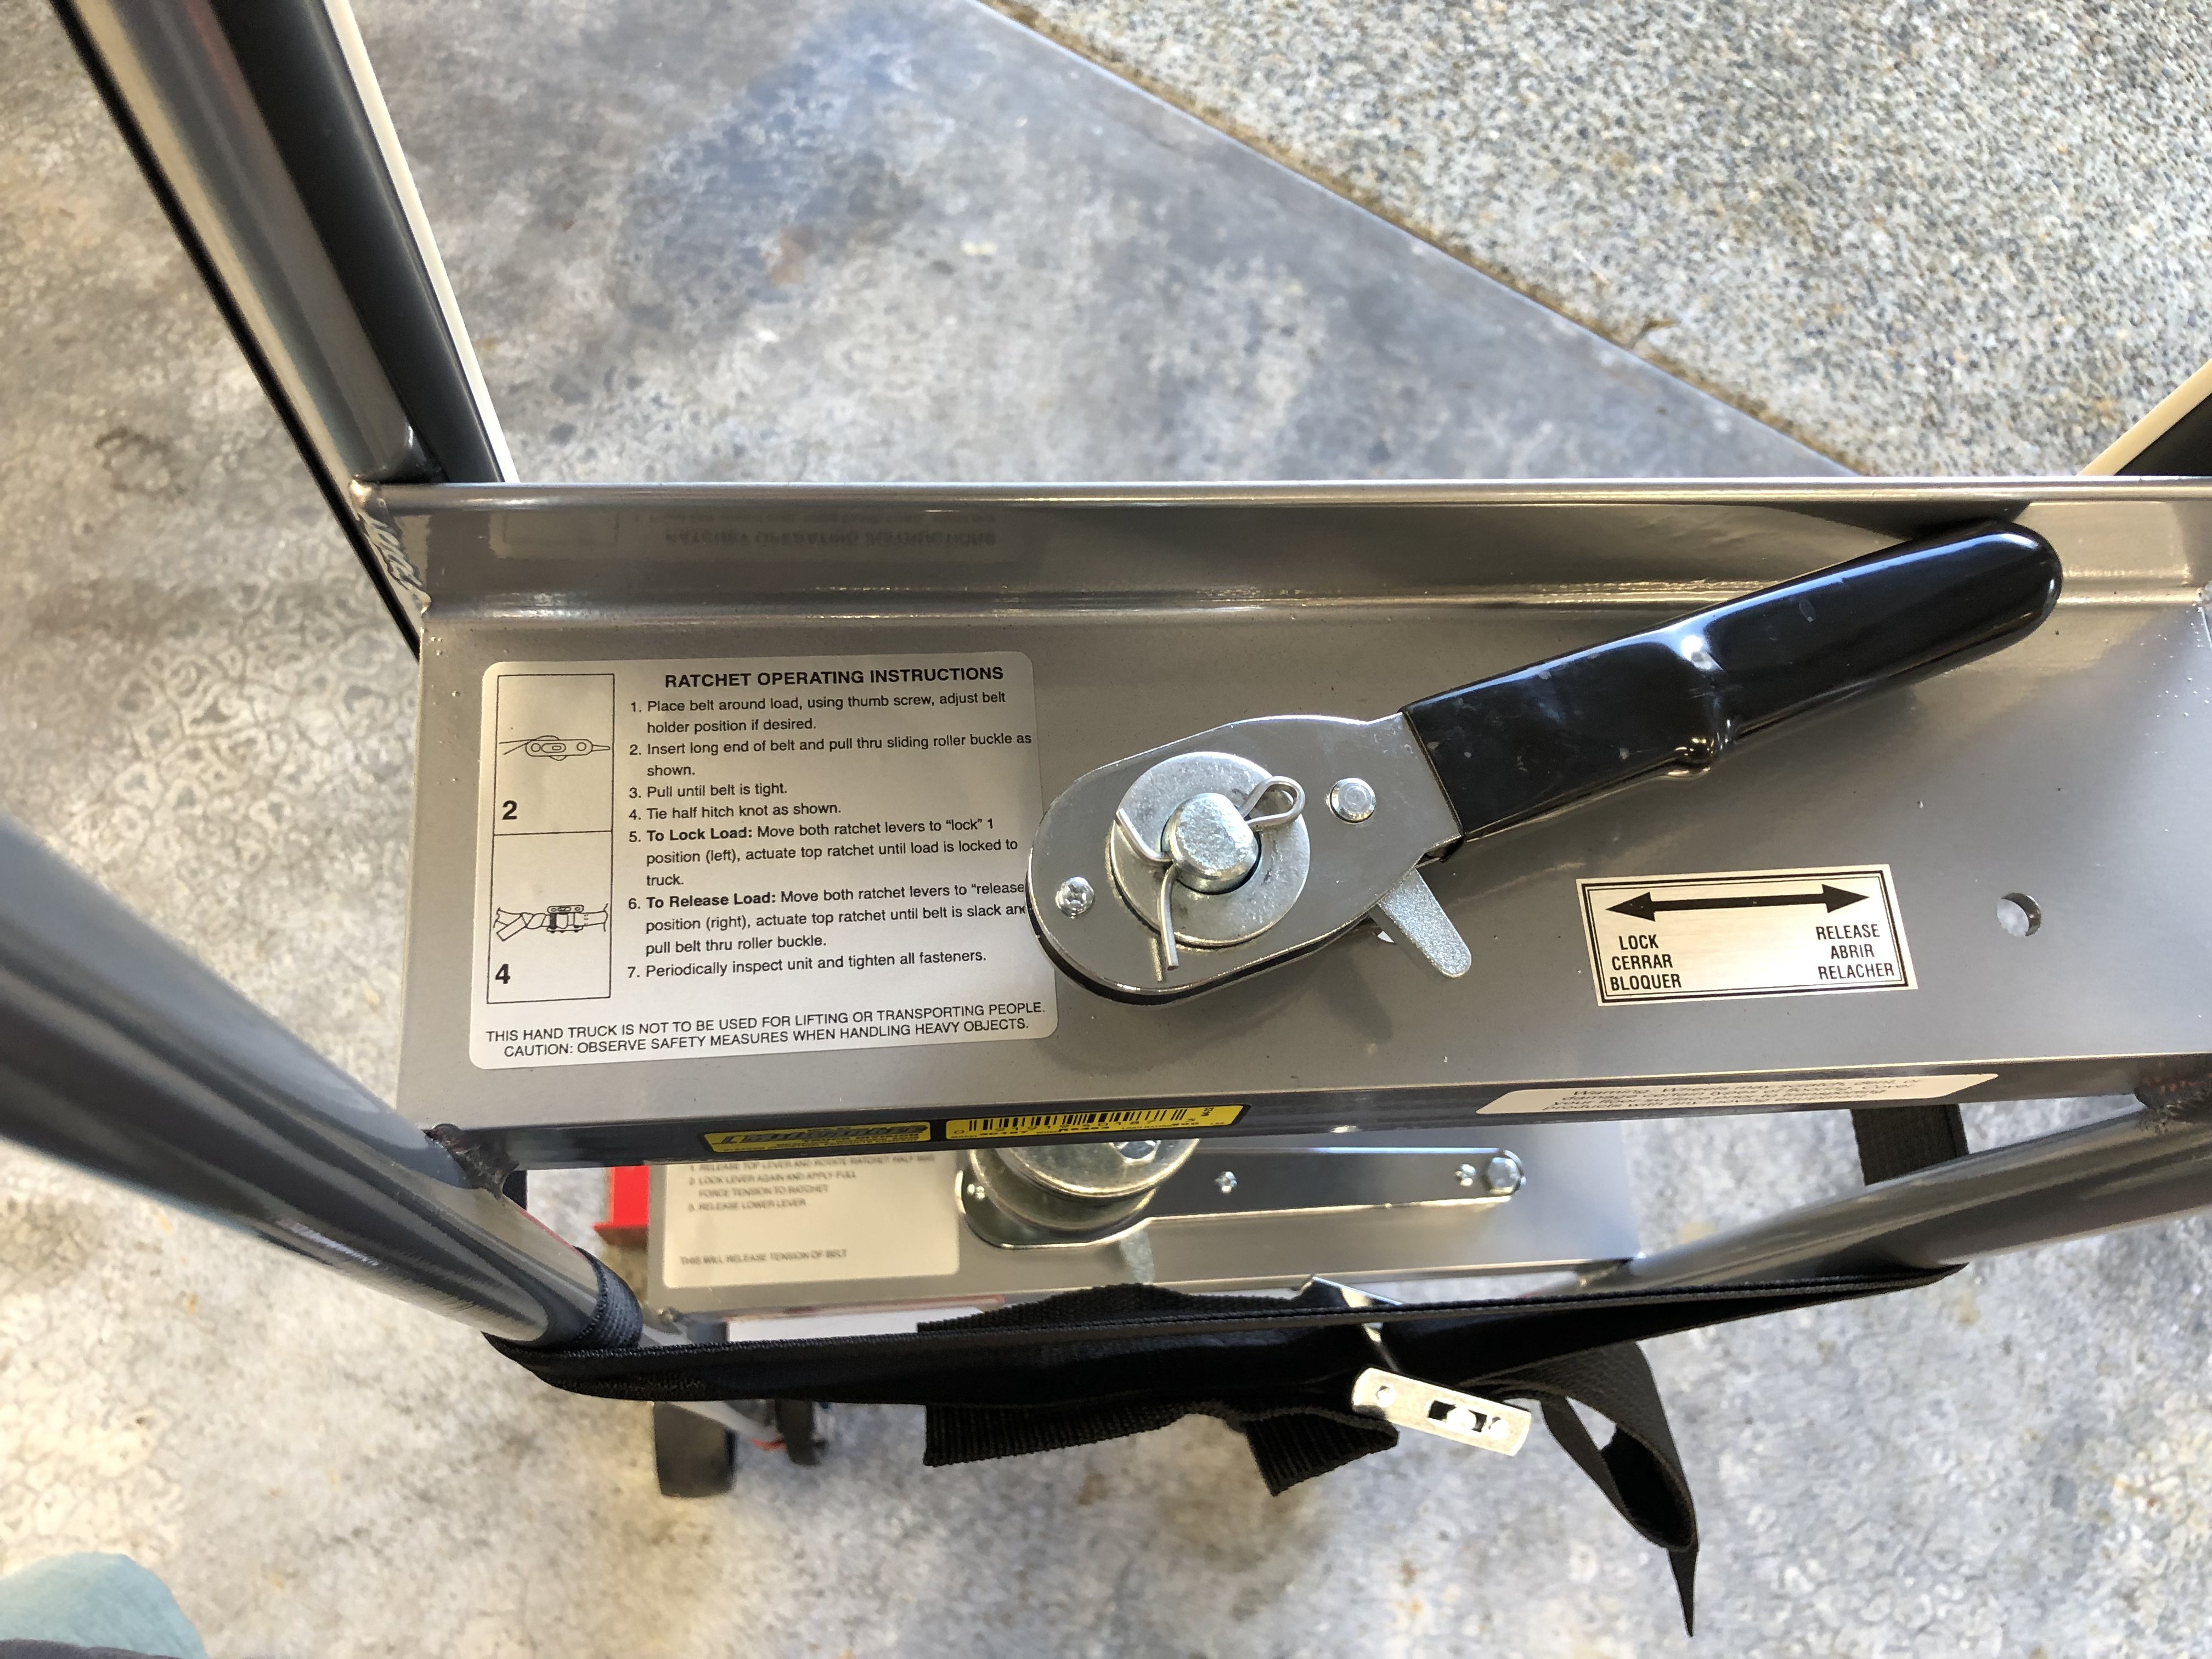 Appliance Dolly, Milwaukee 40187: Buckle instructions are actually needed, it's not user-friendly.